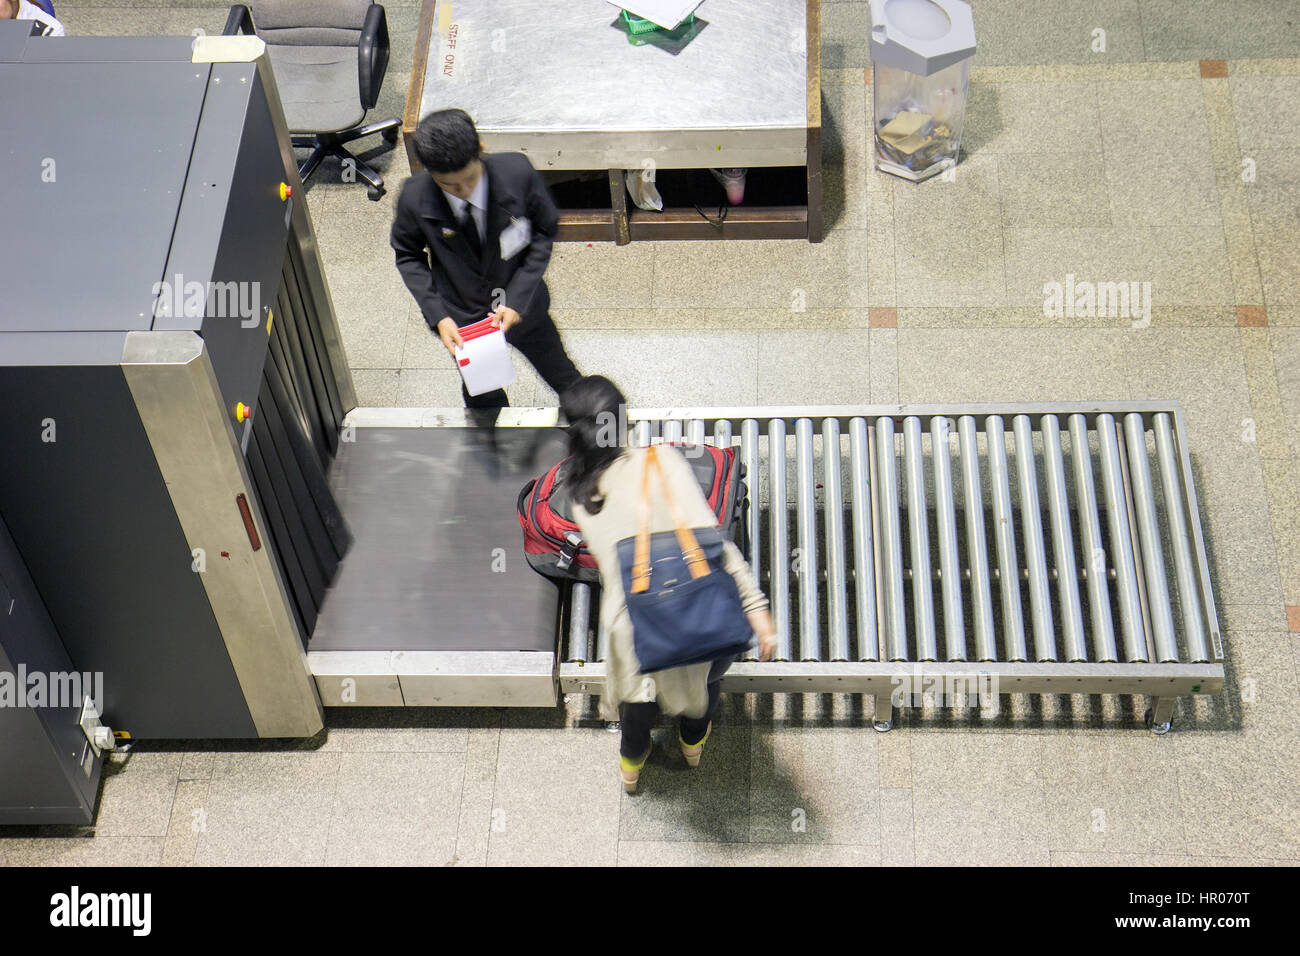 Control baggage at the airport. Airport scanner checked luggage of passengers before departure. Stock Photo